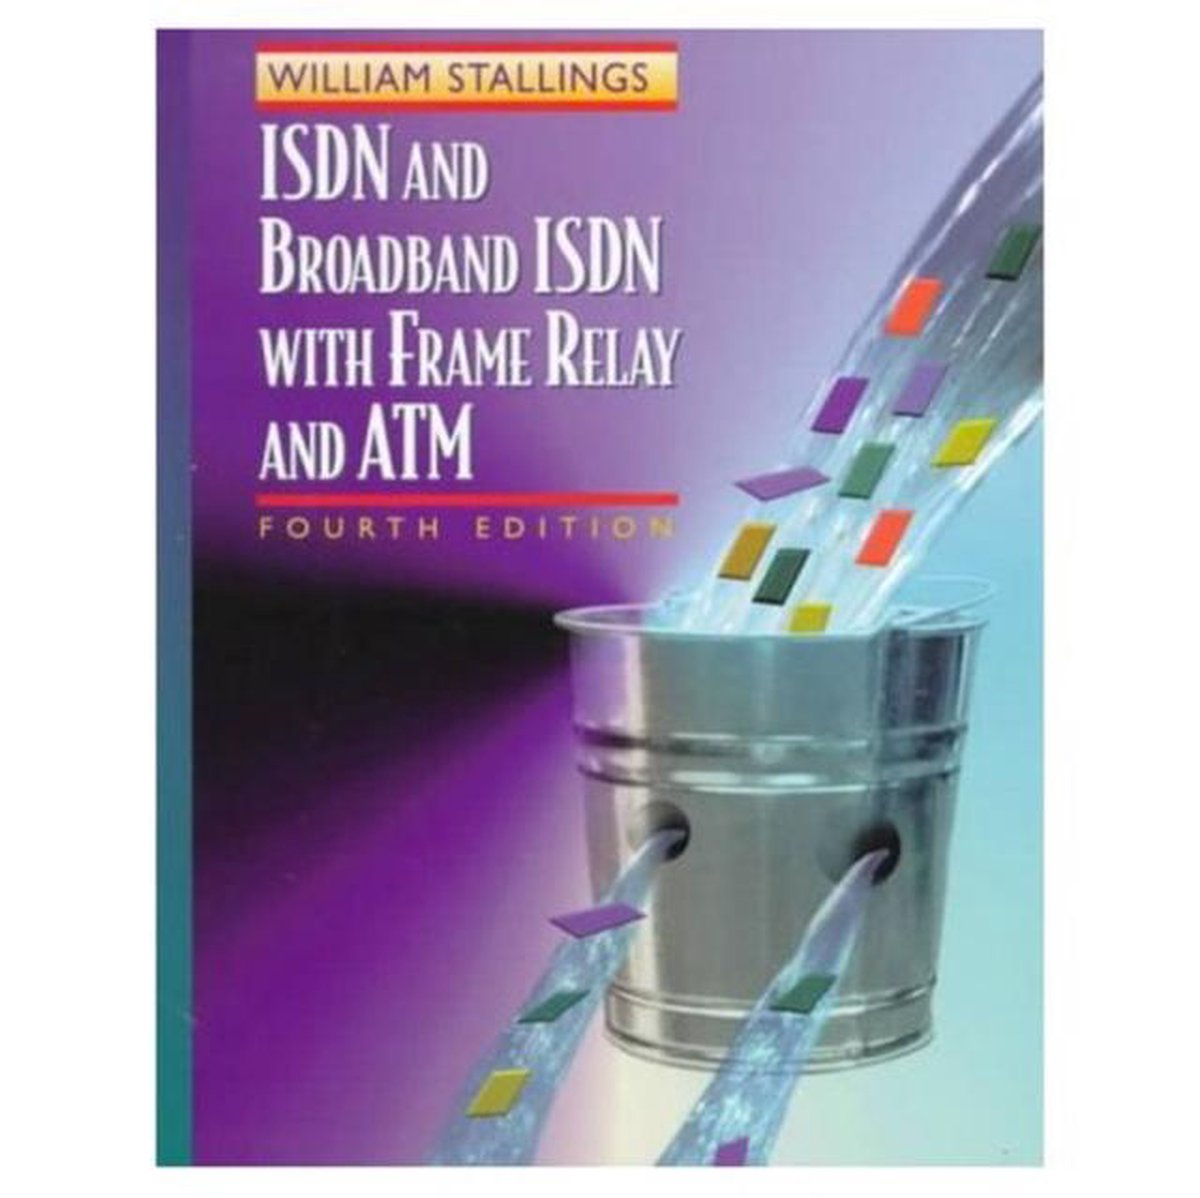 ISDN and Broadband ISDN with Frame Relay and ATM - William Stallings